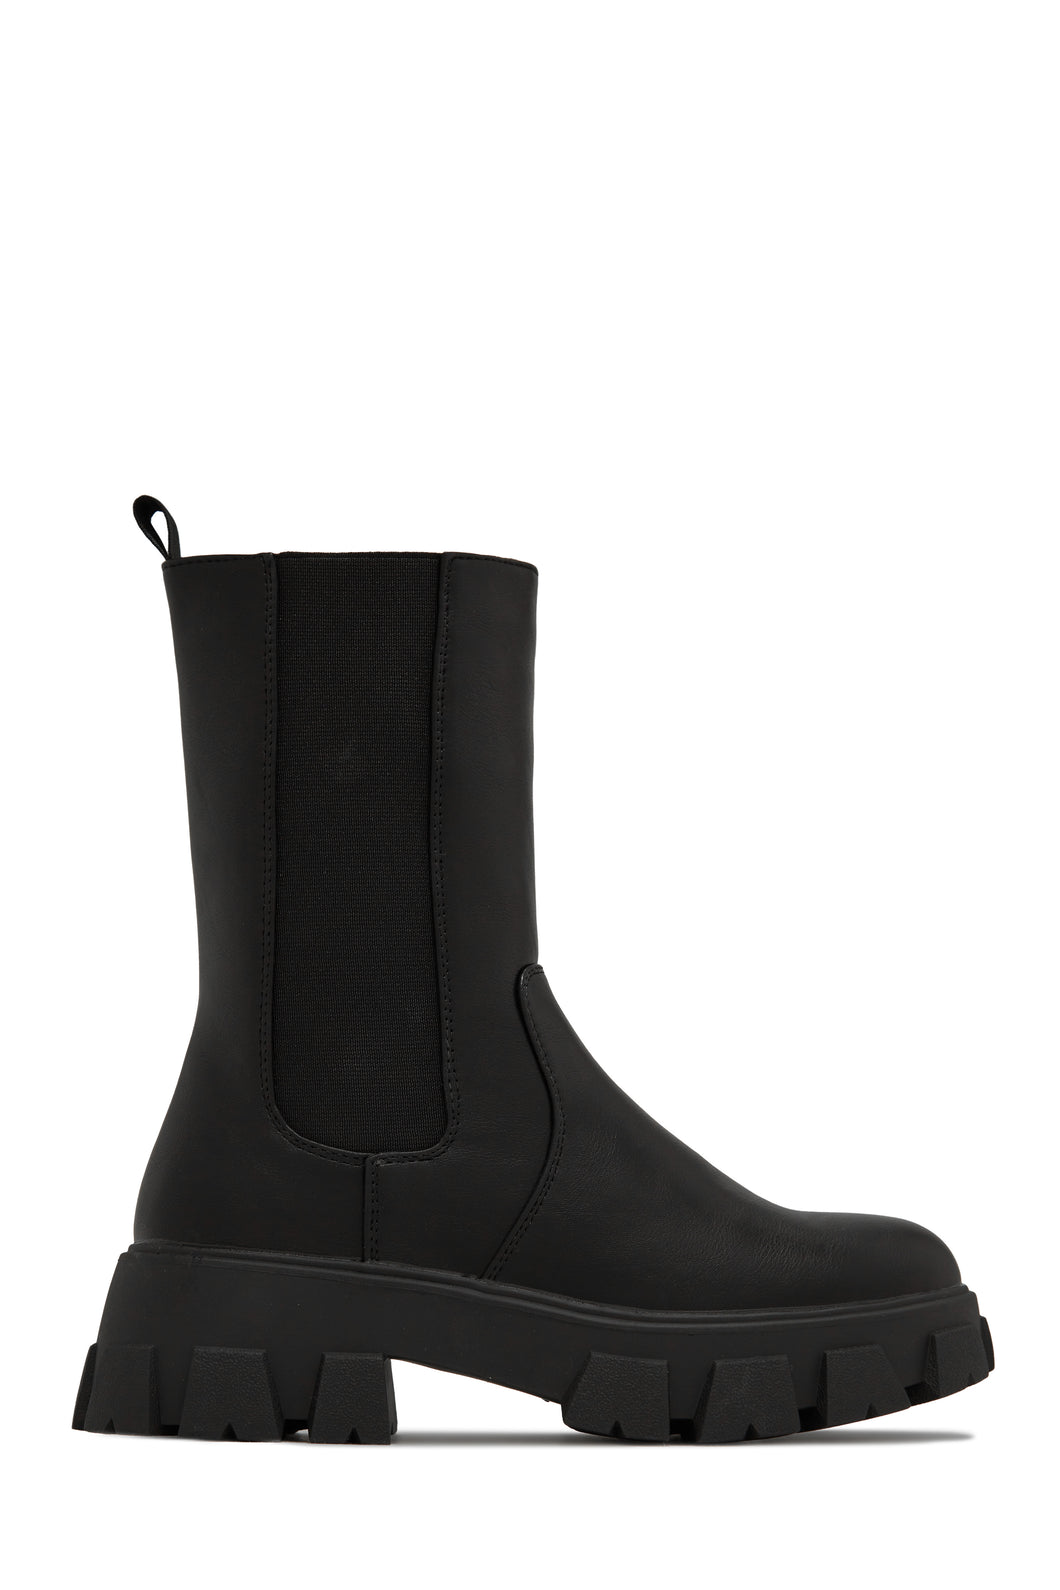 Cold As Ice Flat Boots - Black